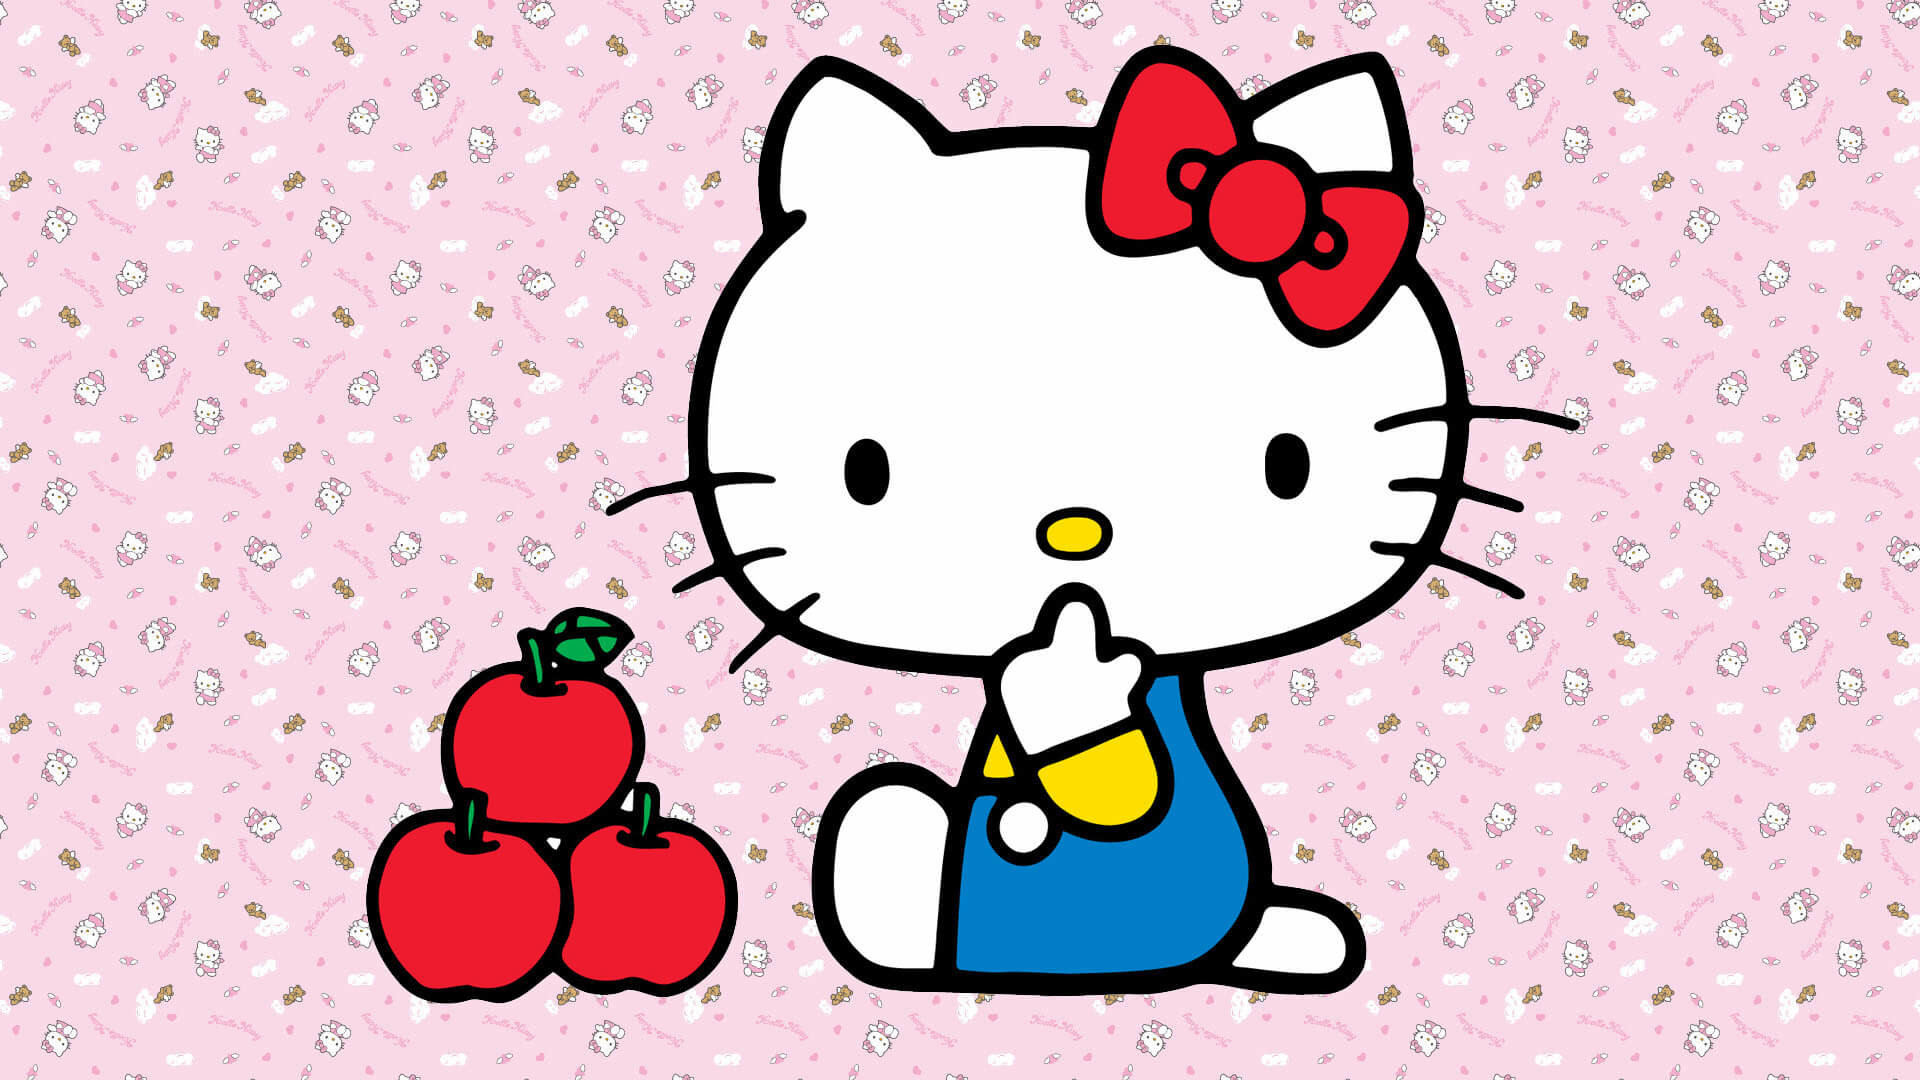 For More Wallpapers For Ipad Click Here - Hello Kitty - HD Wallpaper 